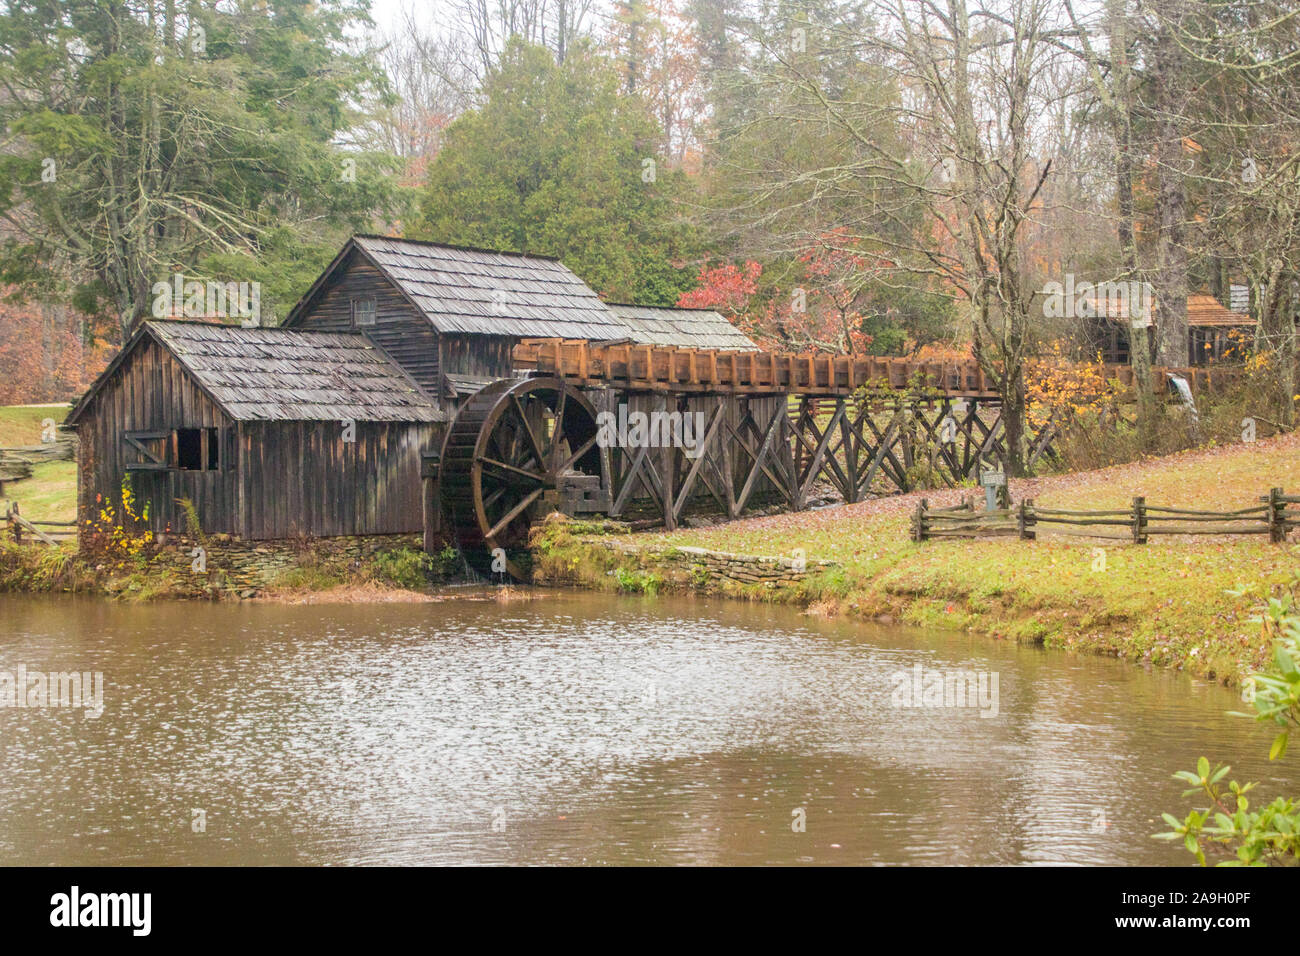 Mabry Grist Mill in Virginia on a rainy day Stock Photo